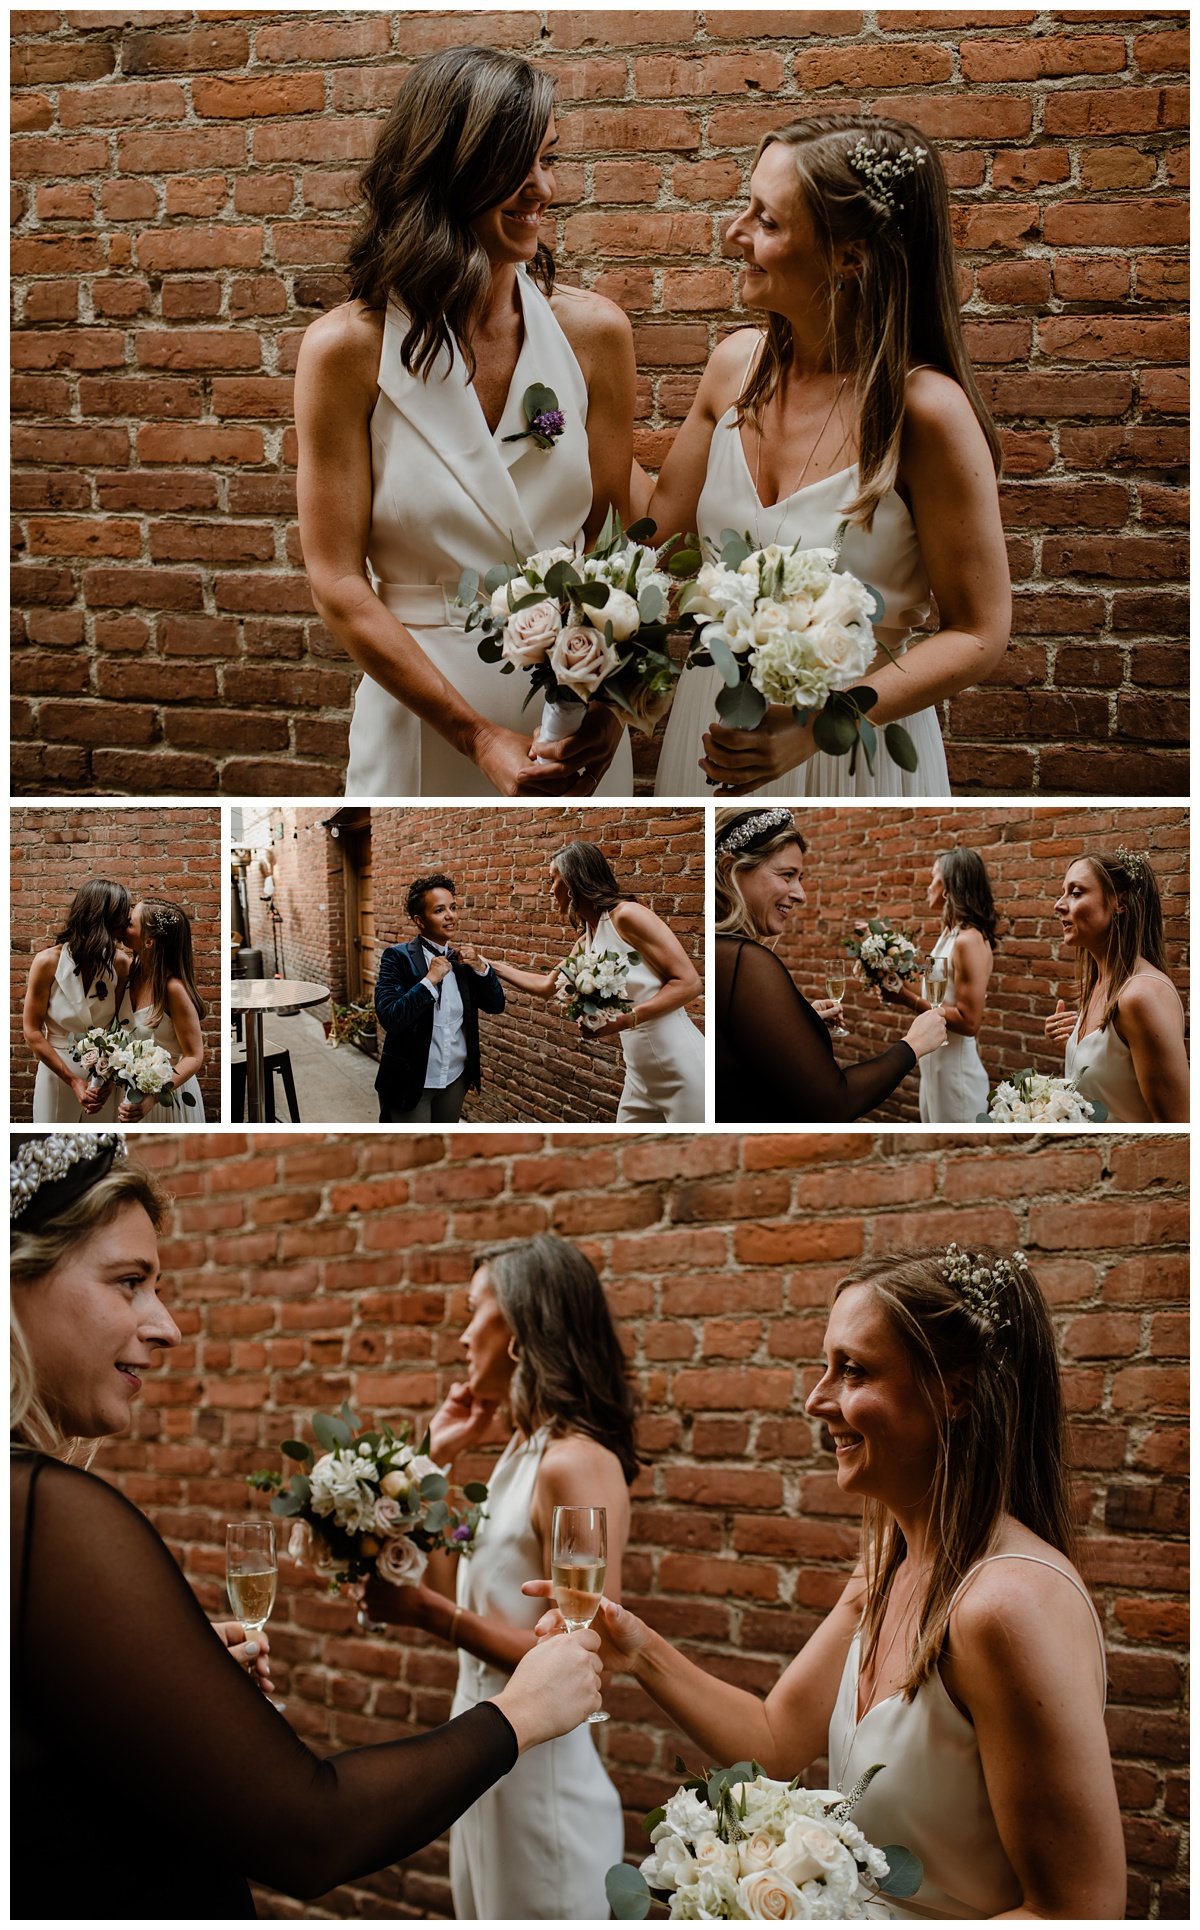 Michelle and Trish Intimate Wedding in Long Beach, CA - Eve Rox Photography-111_WEB.jpg